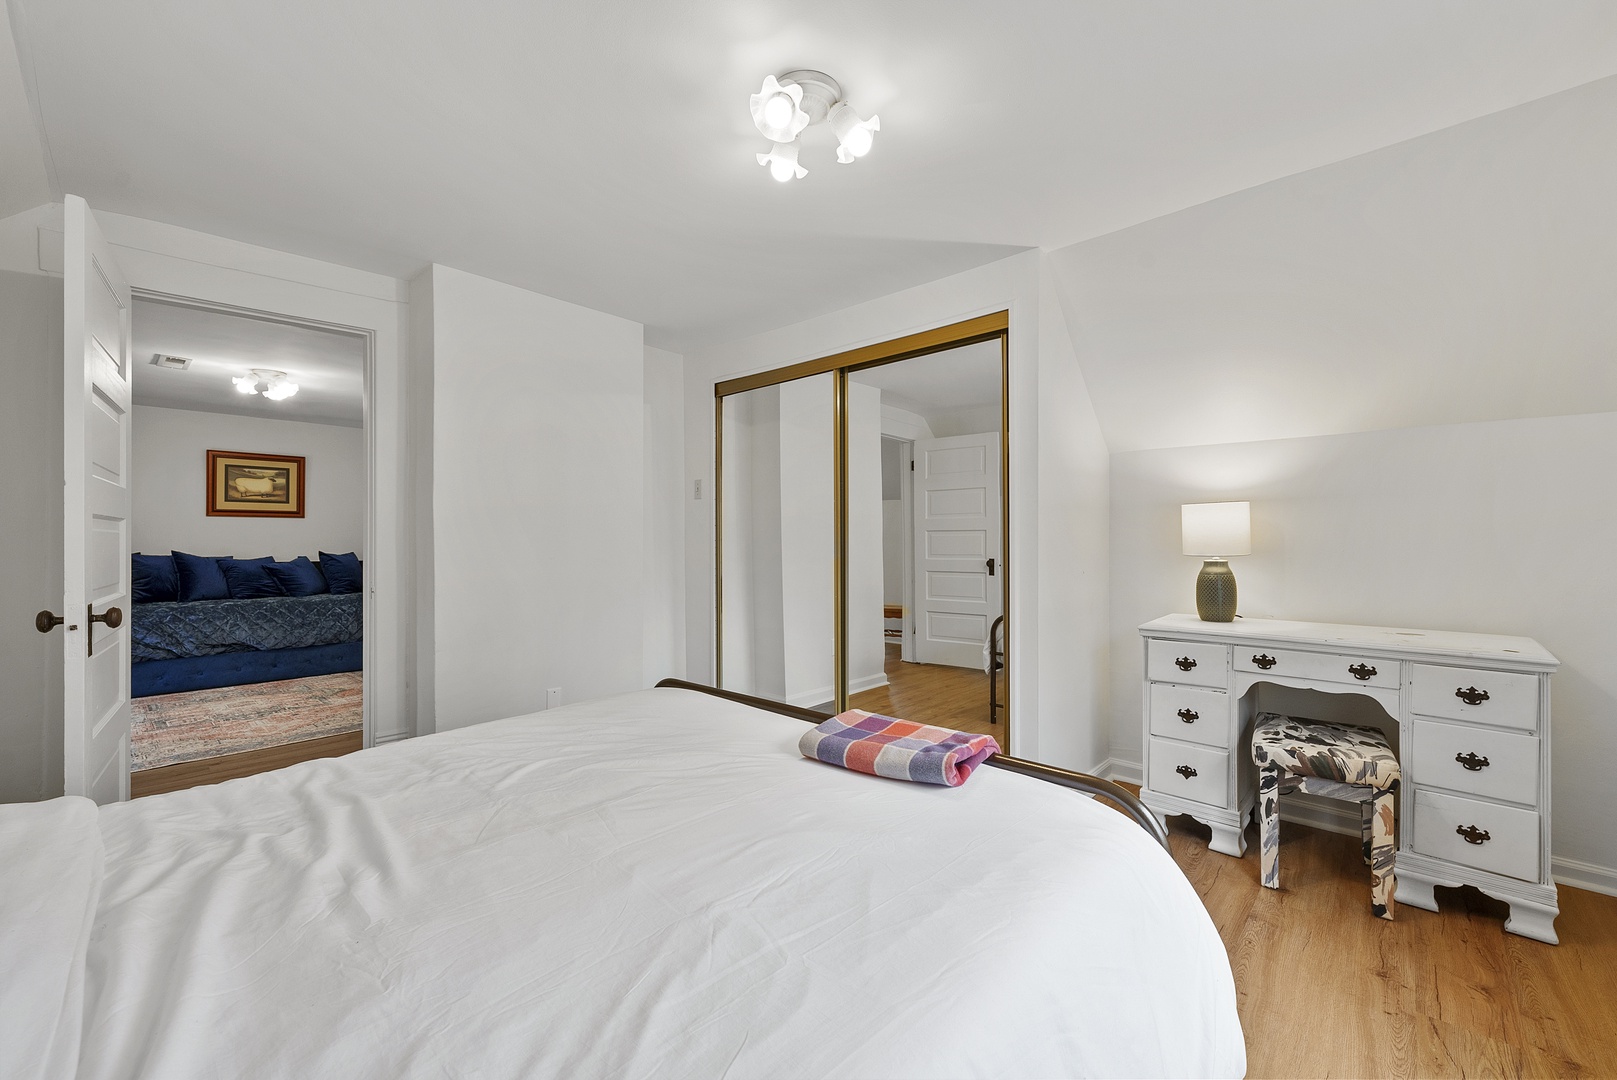 The 2nd level bedroom features a queen-sized bed & desk workspace